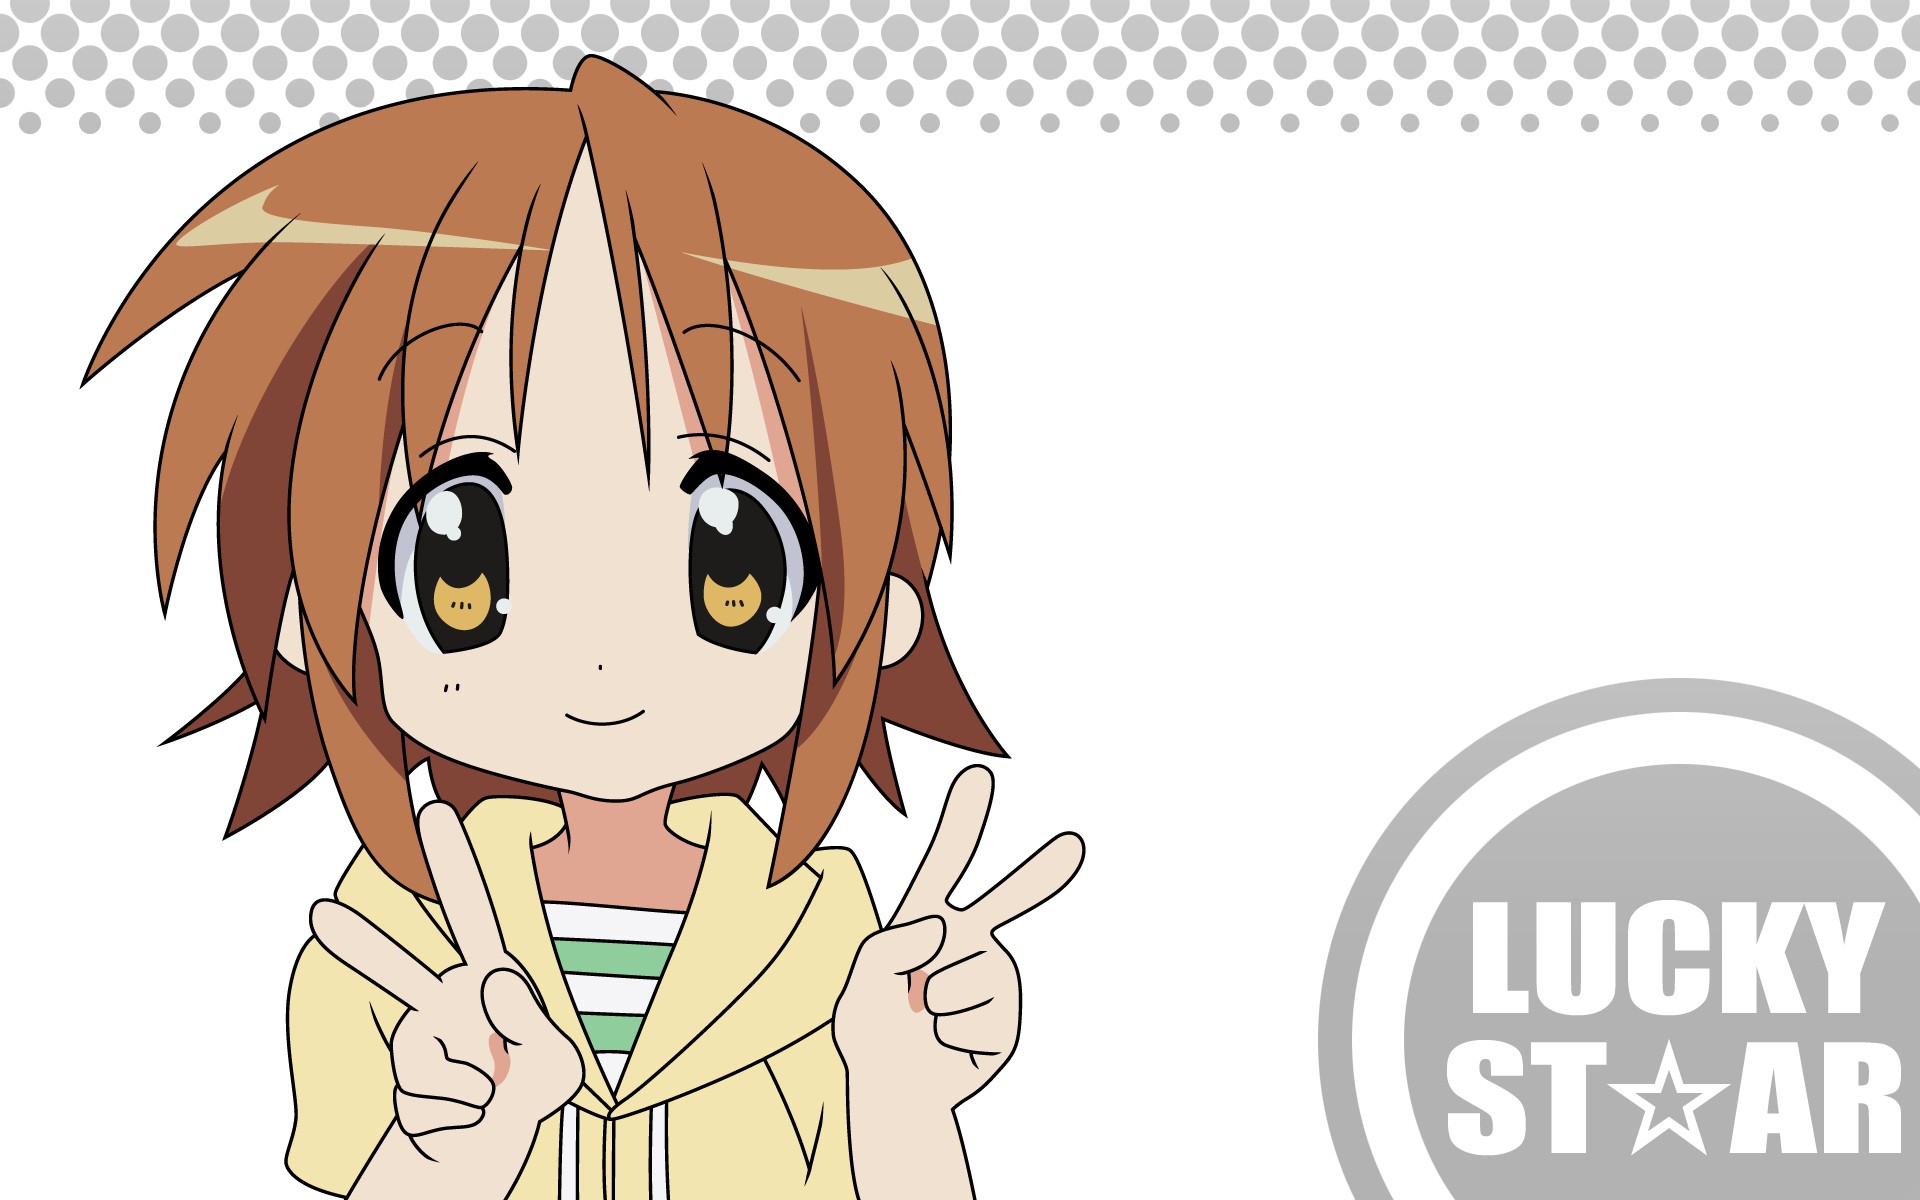 Anime 1920x1200 anime anime girls Lucky Star white background hand gesture victory sign brunette smiling